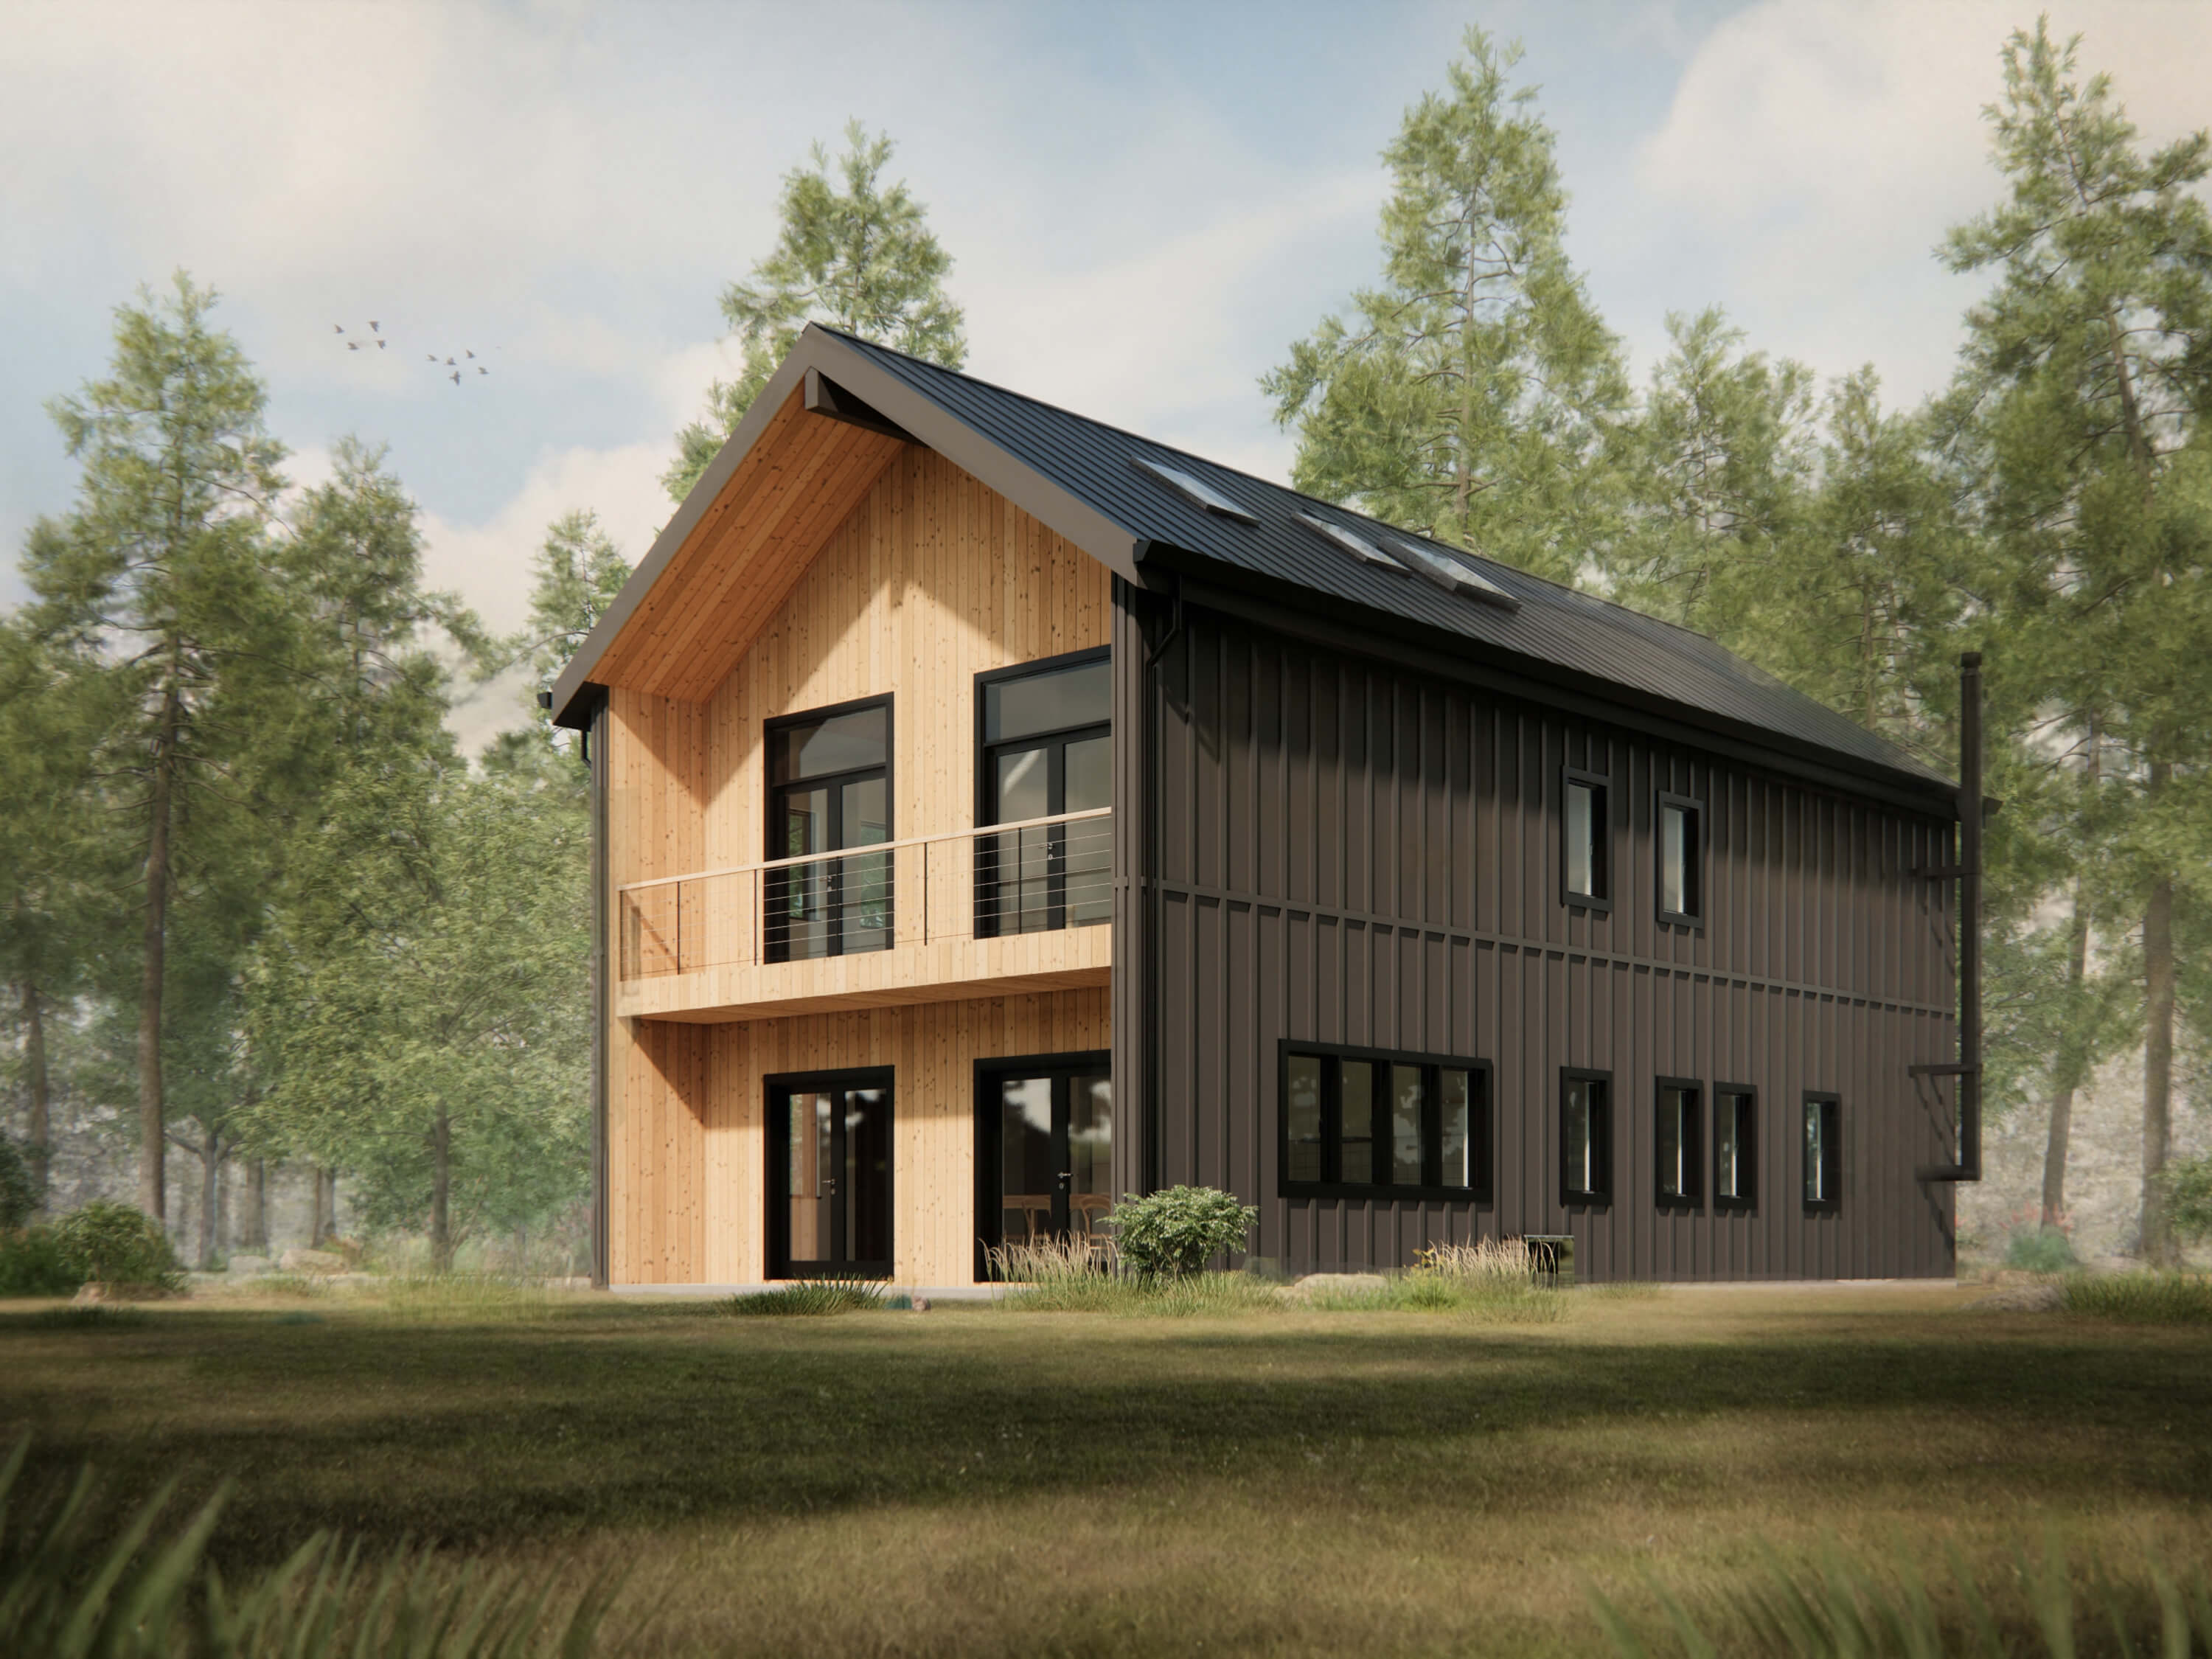 Modern Loft house with 3 bedroom. Black board and batten siding with wood accent. Black window frame